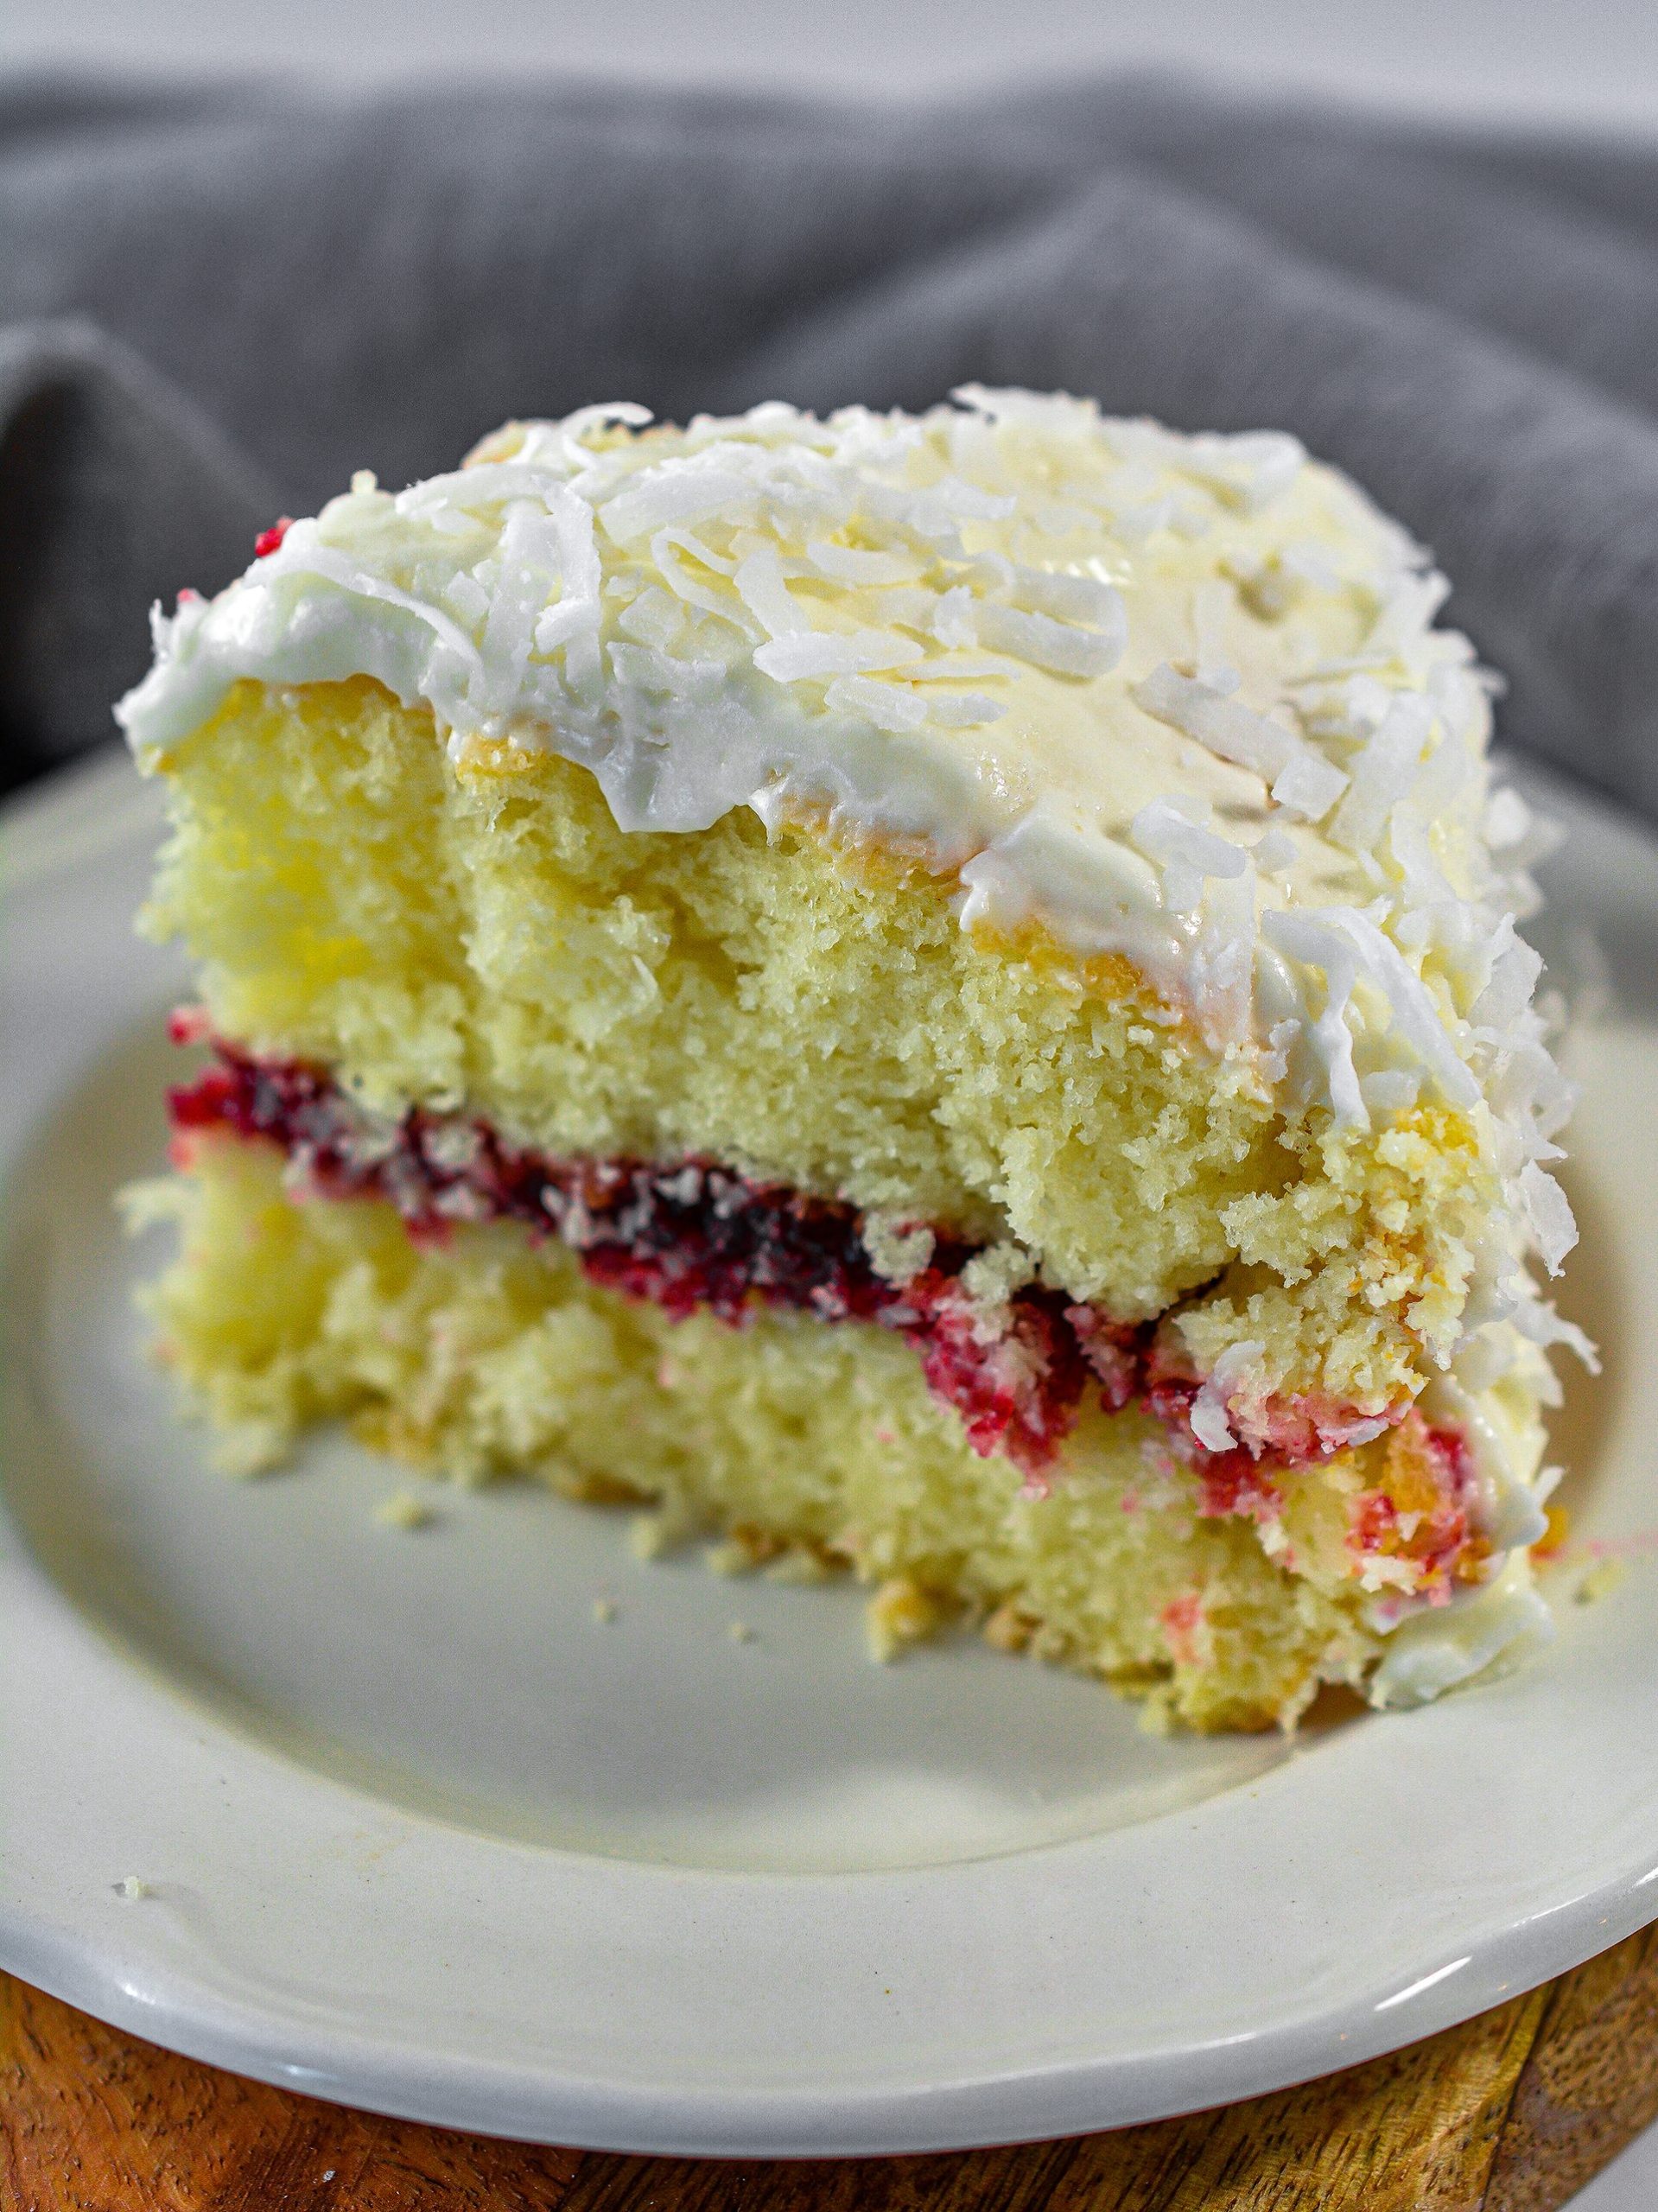 Coconut Cake with Raspberry Filling